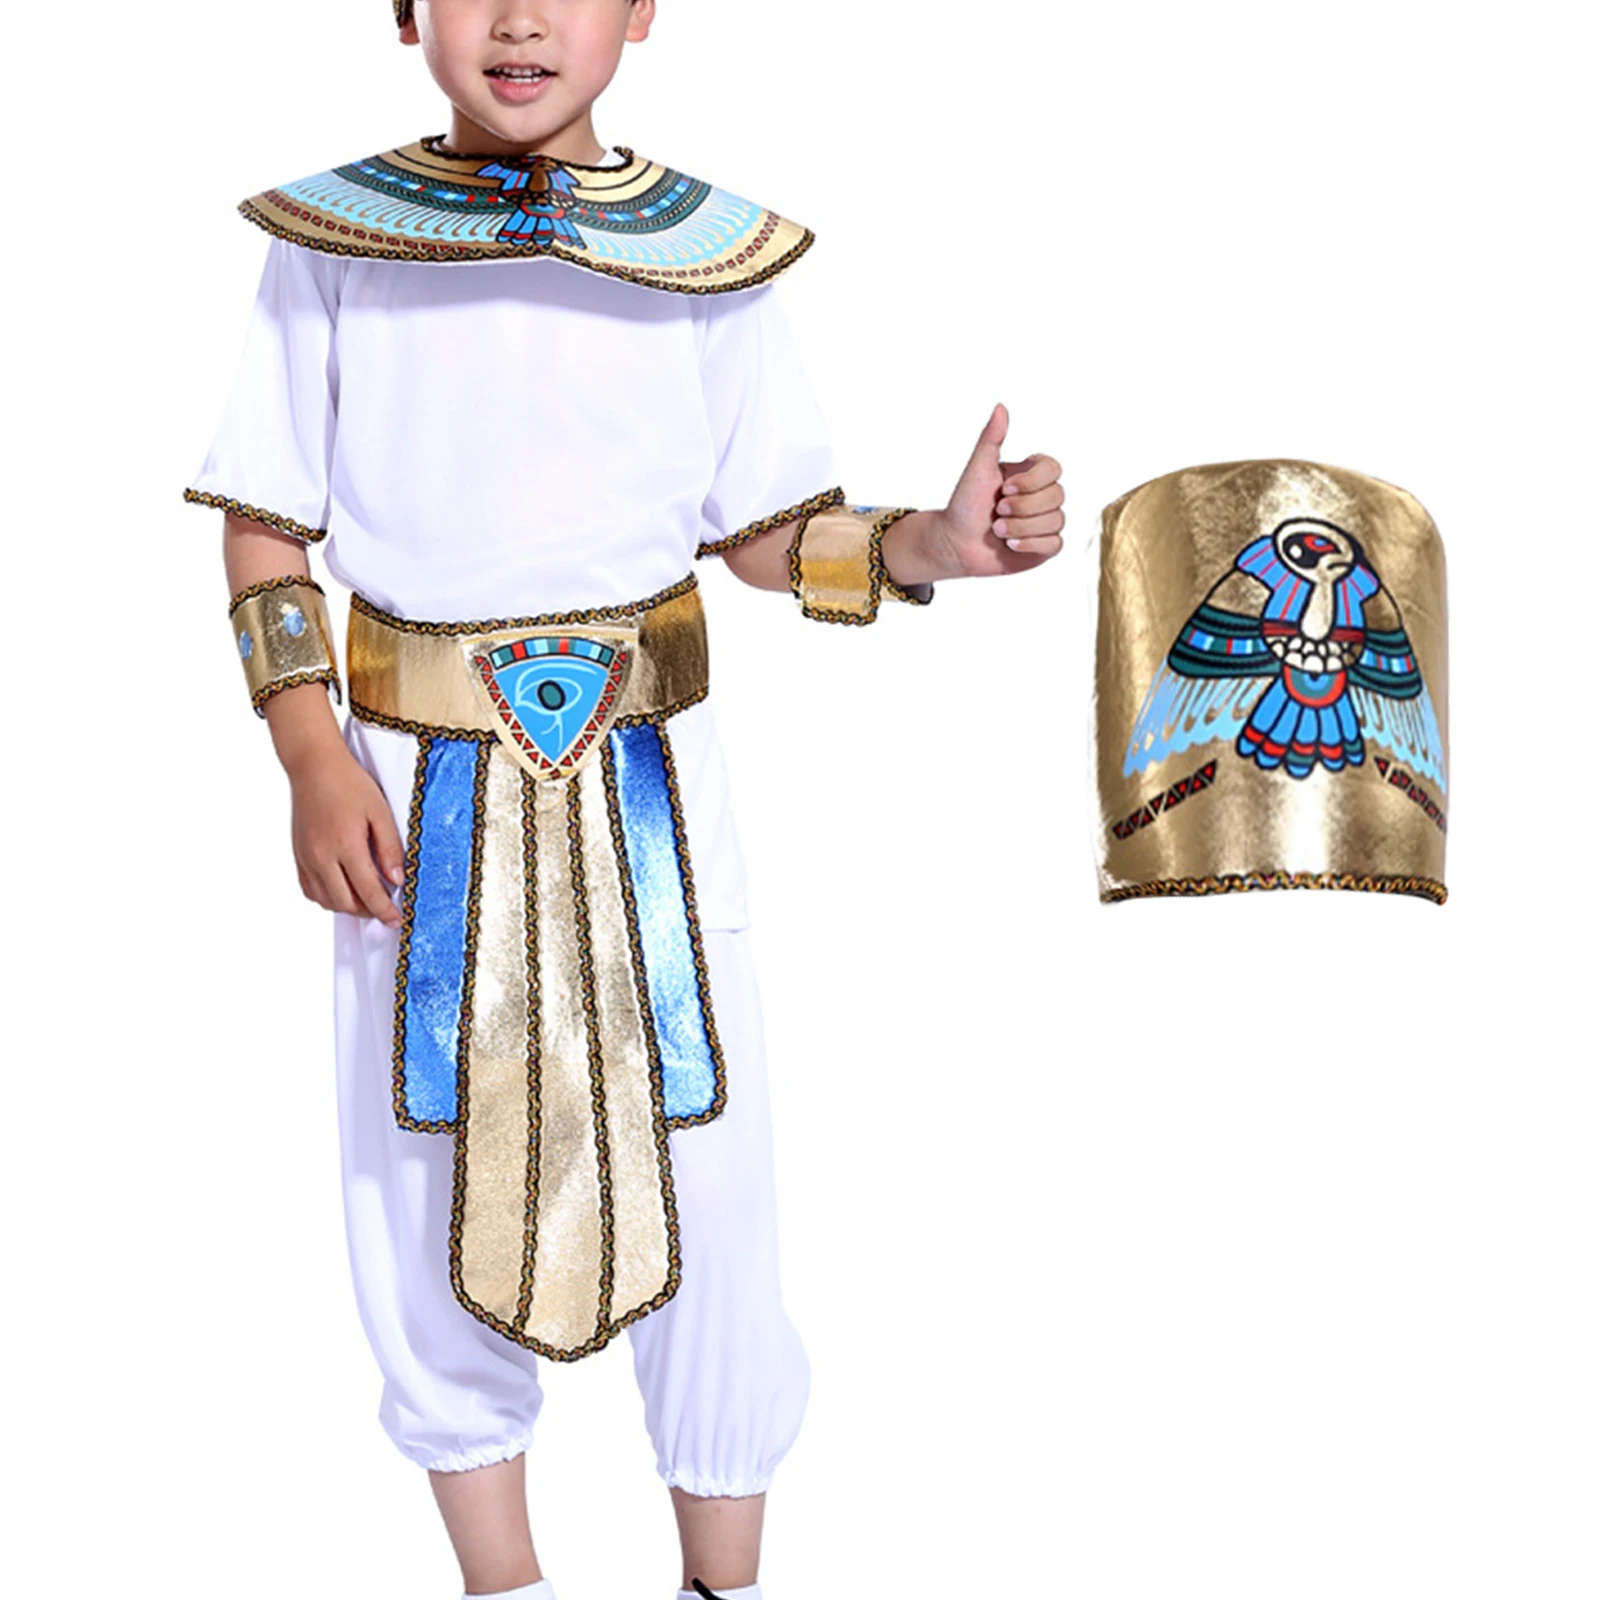 Halloween Cosplay Costume Set Kid Boys Egyptian Prince Outfit Short Sleeve Top with Pants Headwear Neck Collar Armbands Belt Set